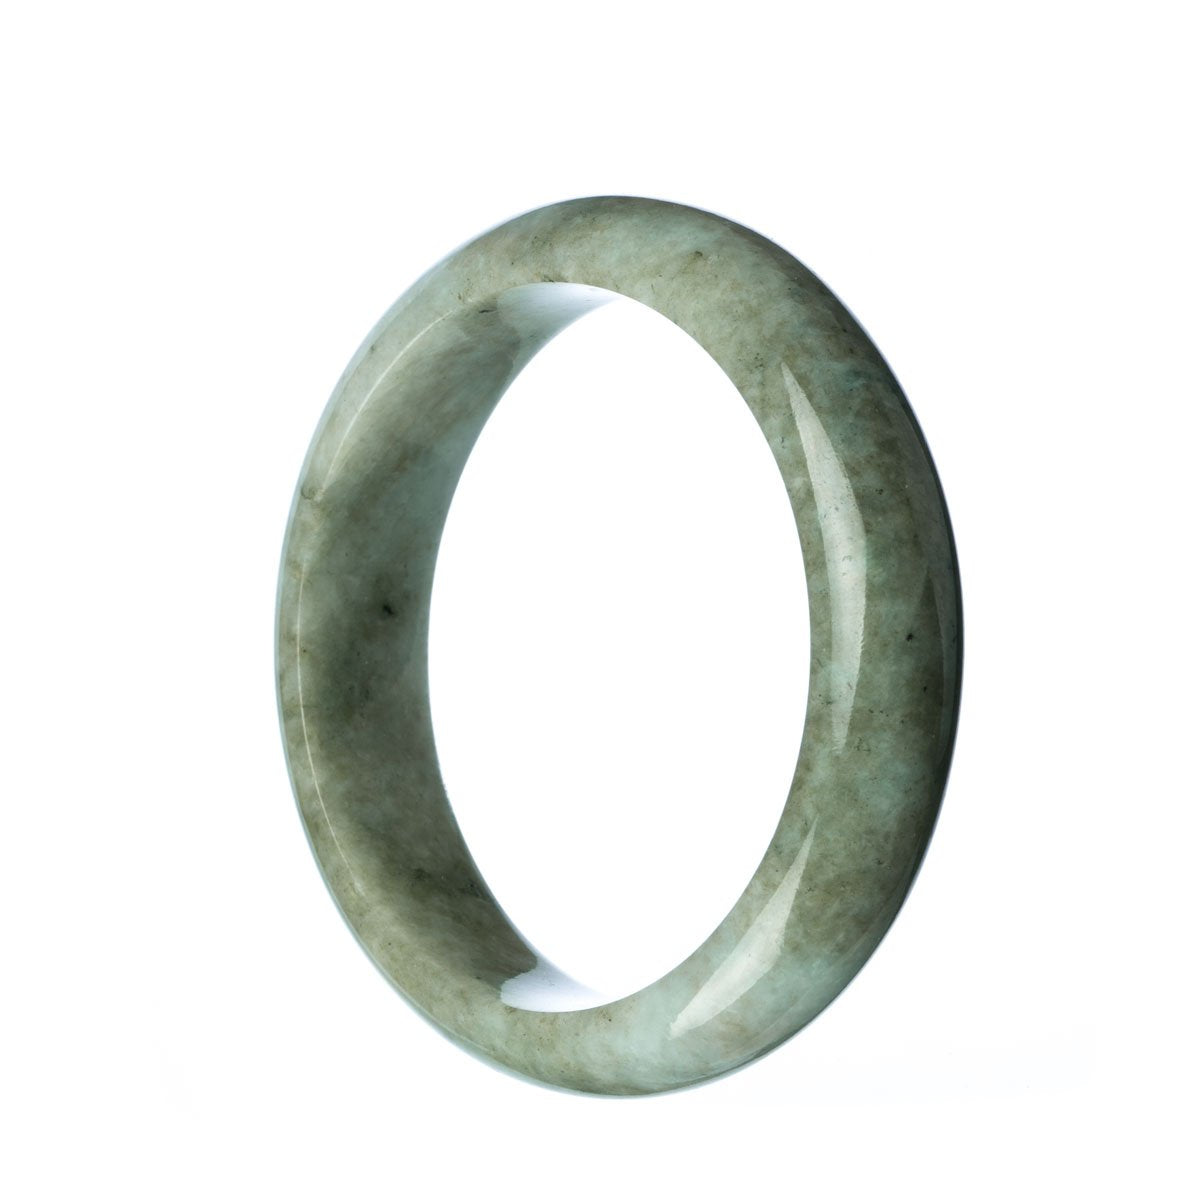 A close-up photo of a beautiful half-moon shaped grey jade bangle bracelet. The bracelet has a smooth, polished surface and an untreated, genuine grey jade stone. The bracelet has a diameter of 59mm, making it a perfect fit for most wrists. It is a timeless piece of jewelry that exudes elegance and sophistication.